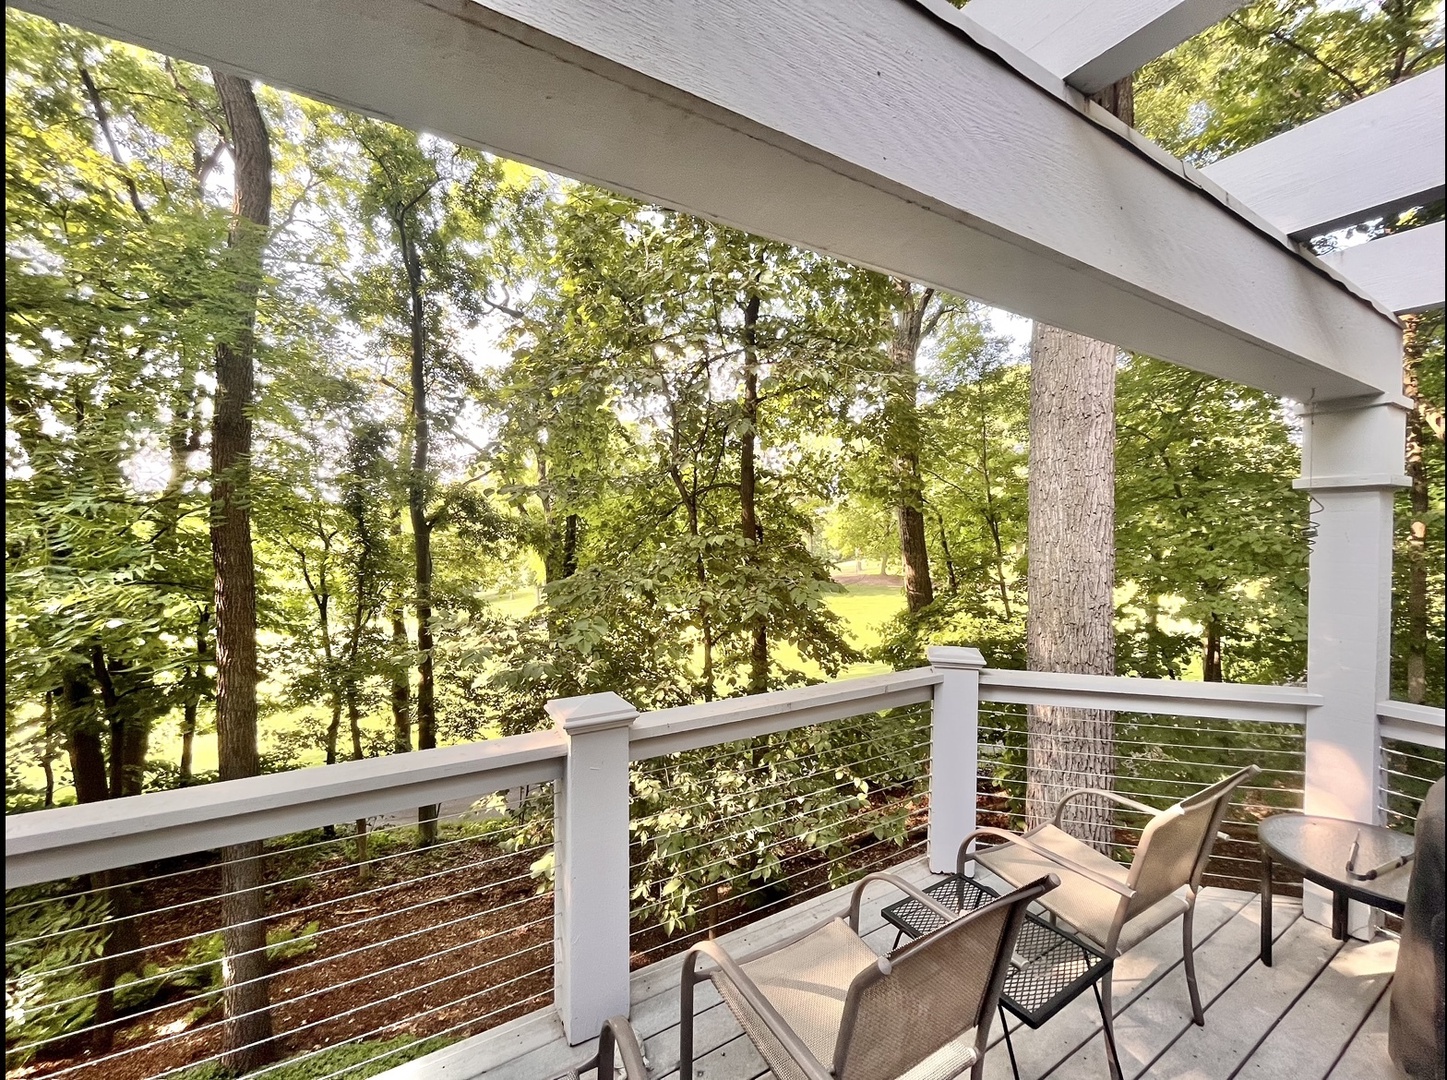 Kick back & unwind on the back deck with breathtaking golf course views